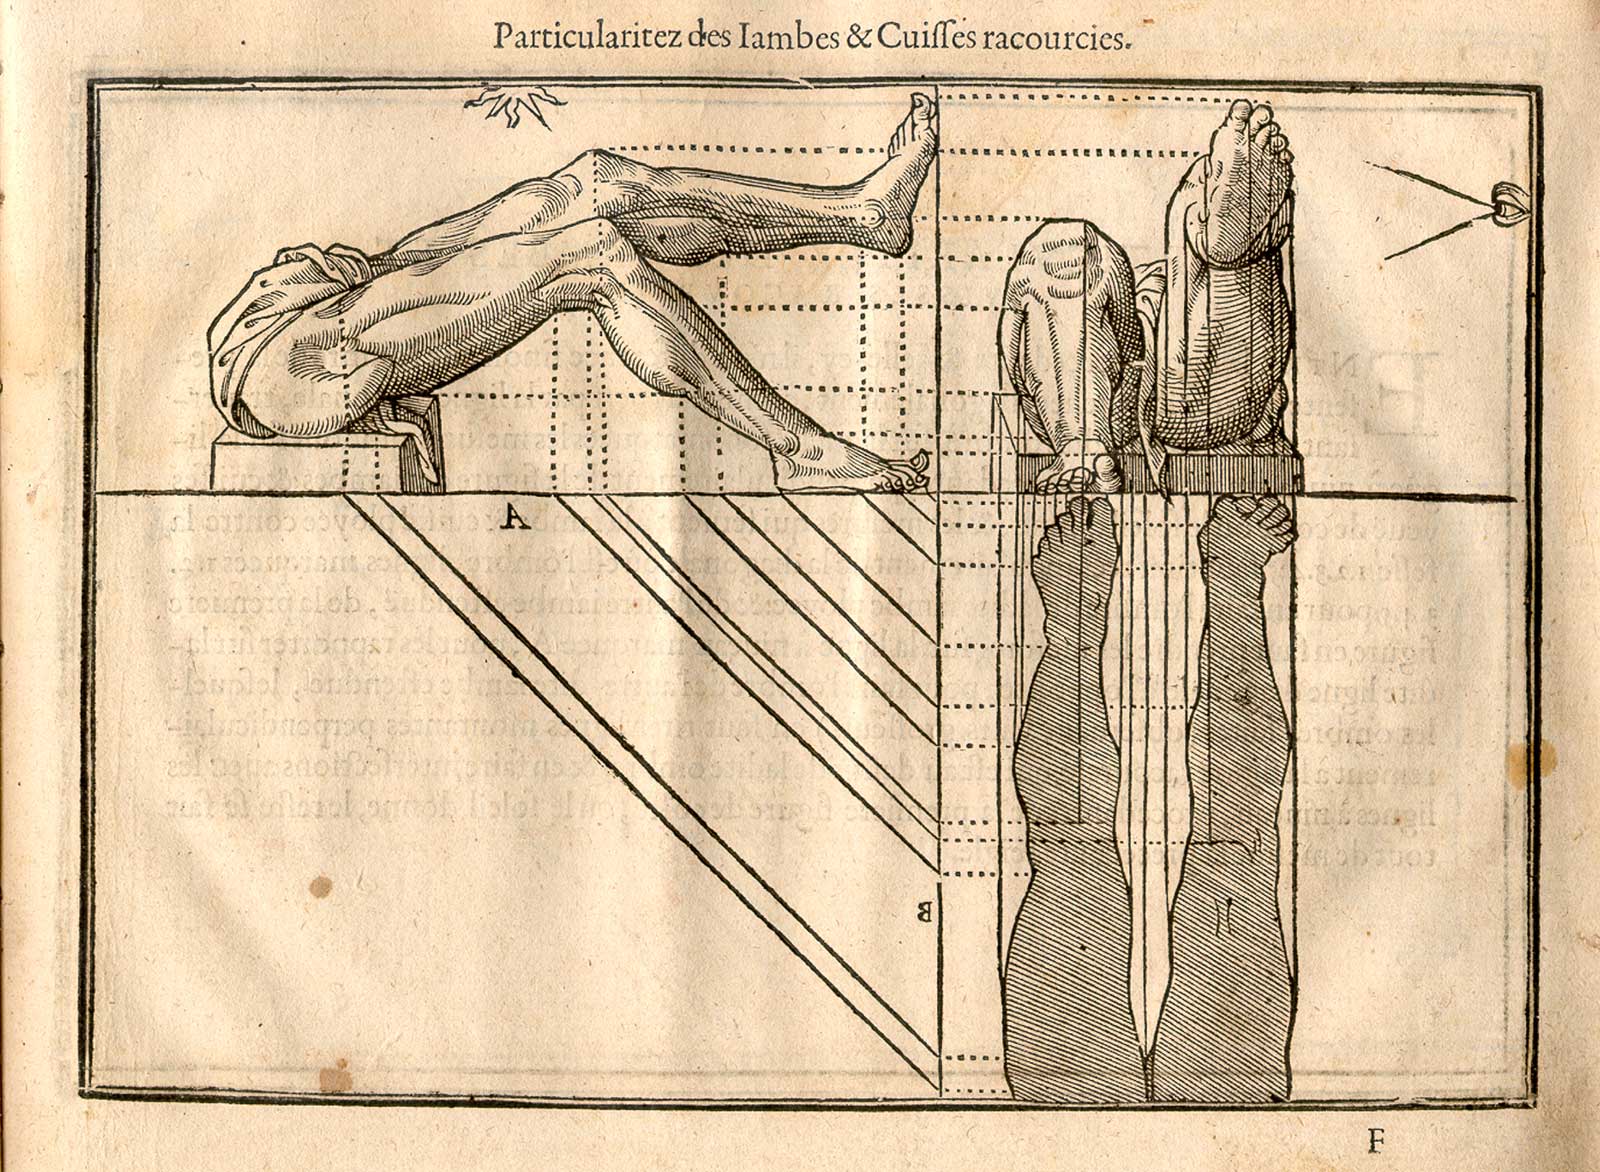 Woodcut illustration of three images of the musculature of the legs with bent knees viewed from the side and above, with measured proportions of each shown, from Jehan Cousin’s Livre de pourtraiture, NLM Call no.: WZ 250 C8673L 1608.